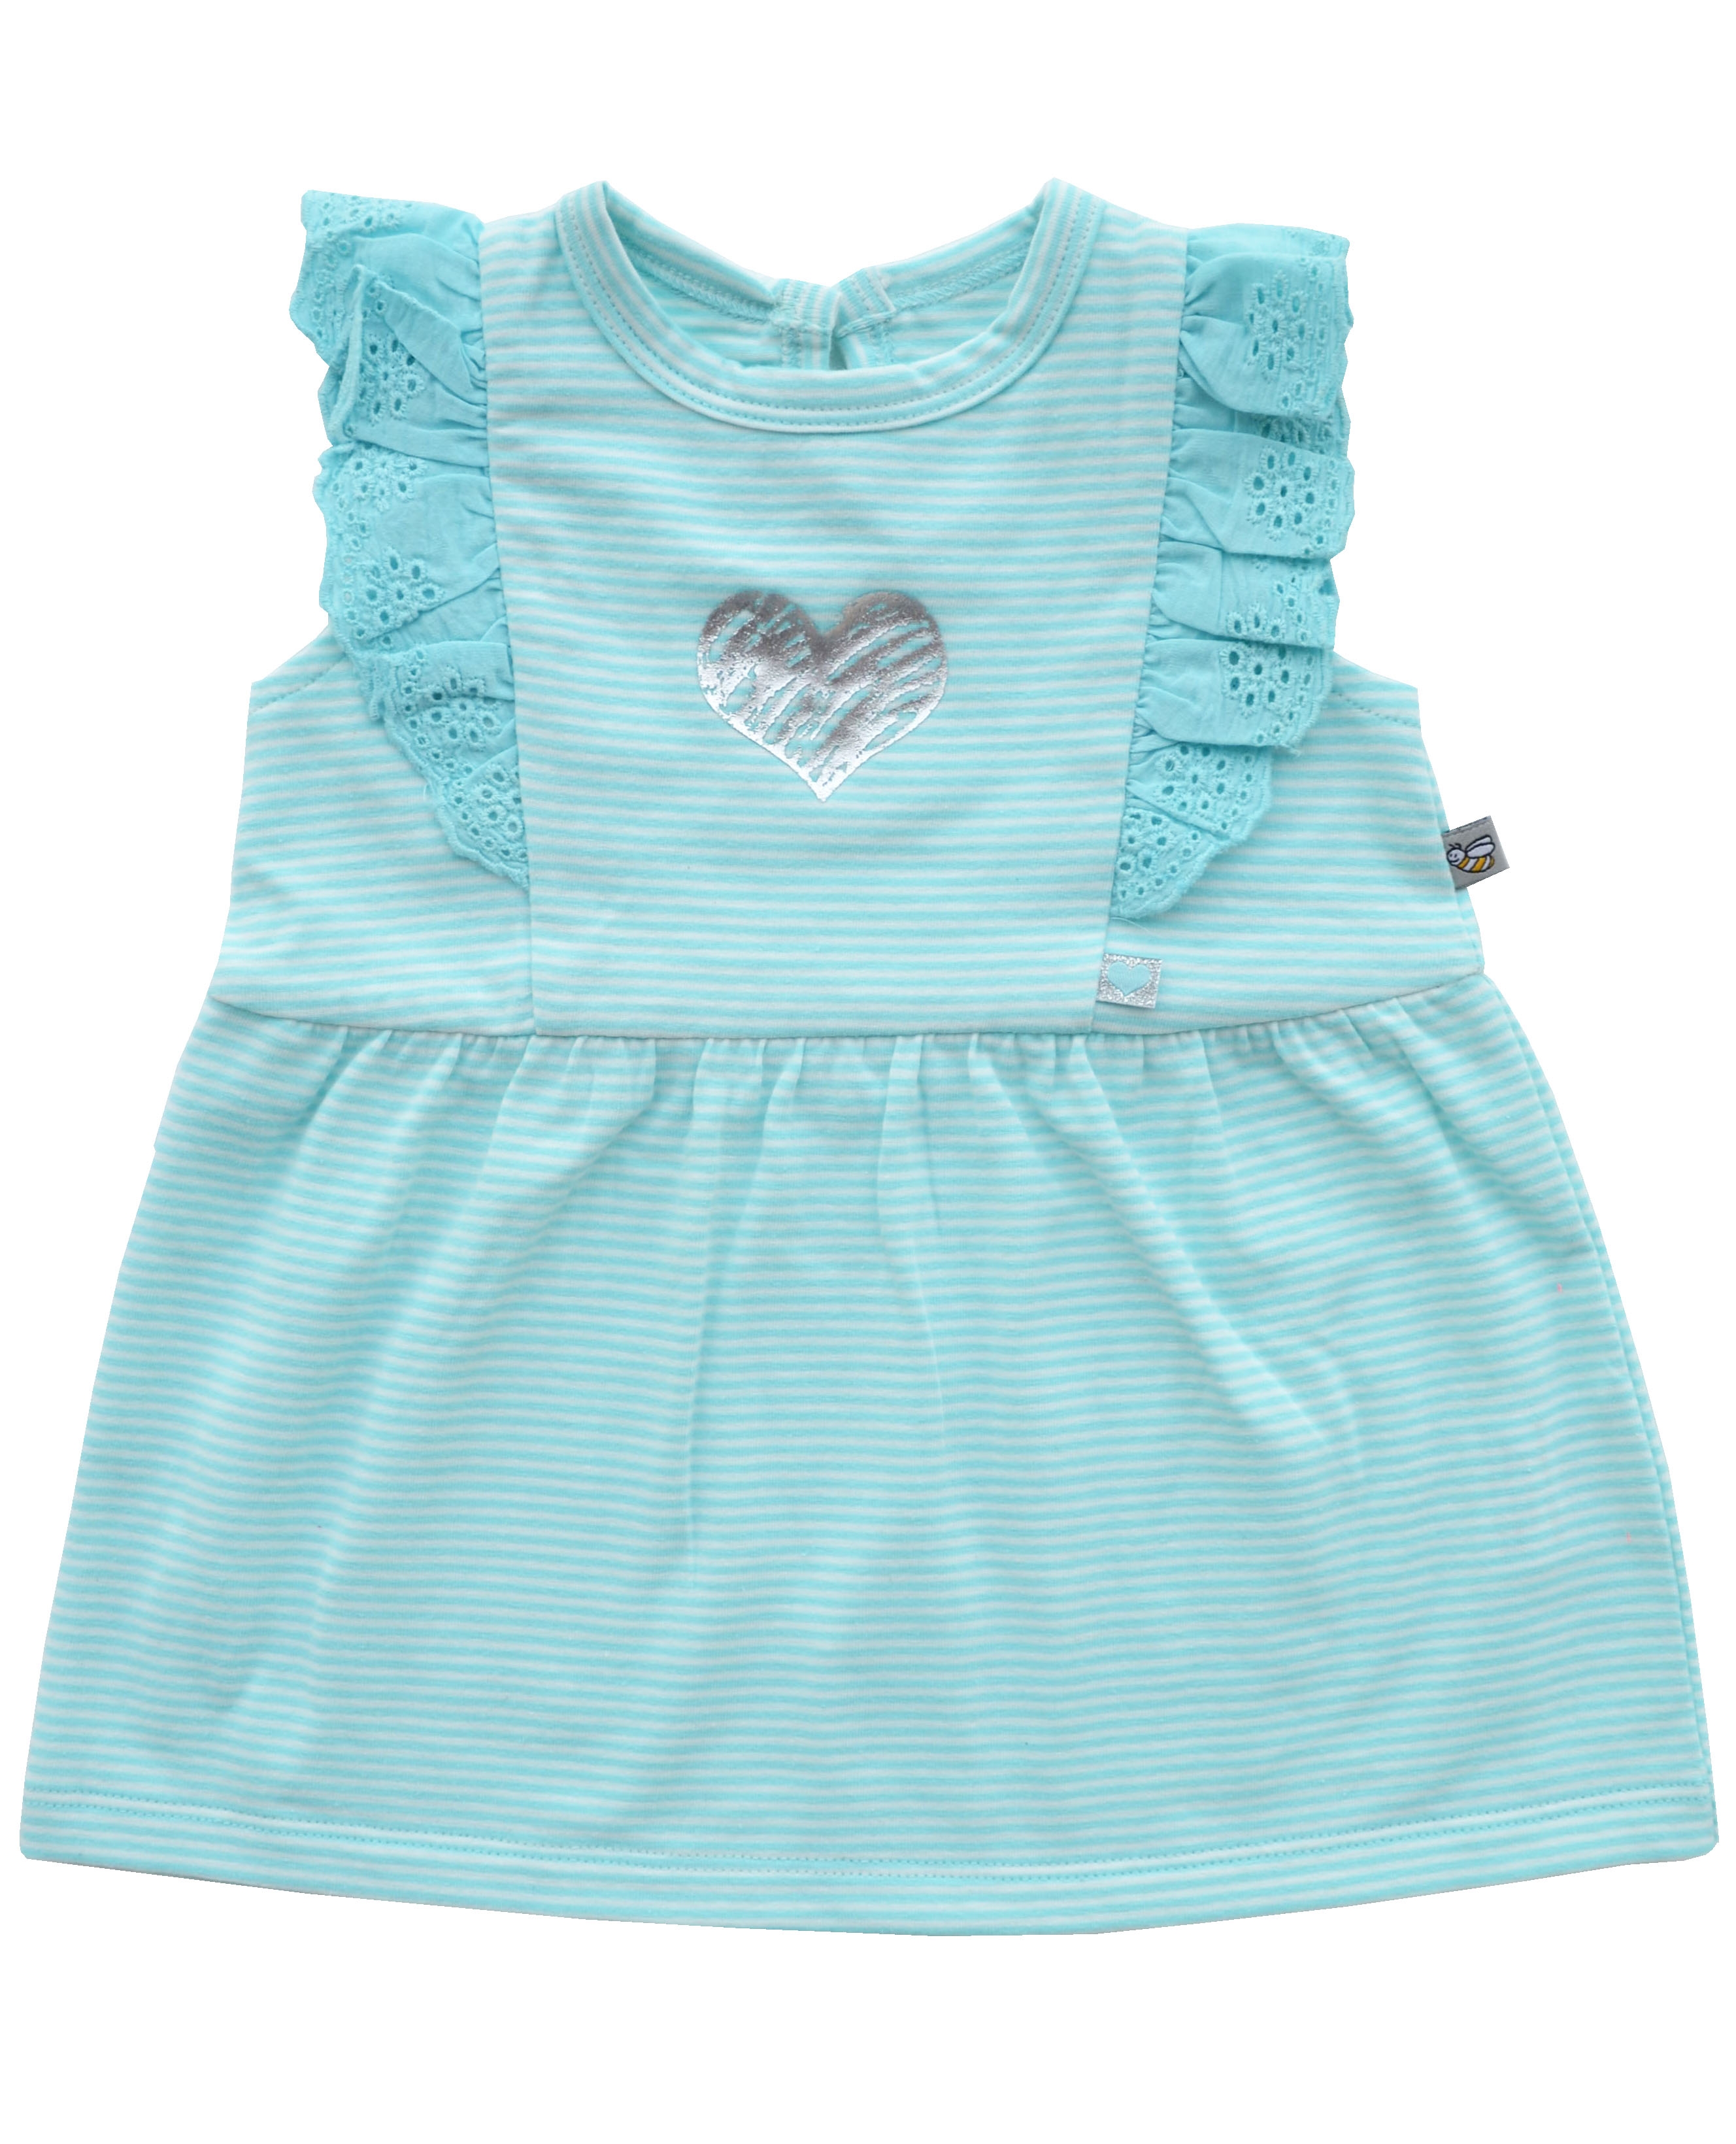 Mint Stripe Sleeveless Dress with Silver Heart Print on chest (95% Cotton 5% Elasthan Jersey)